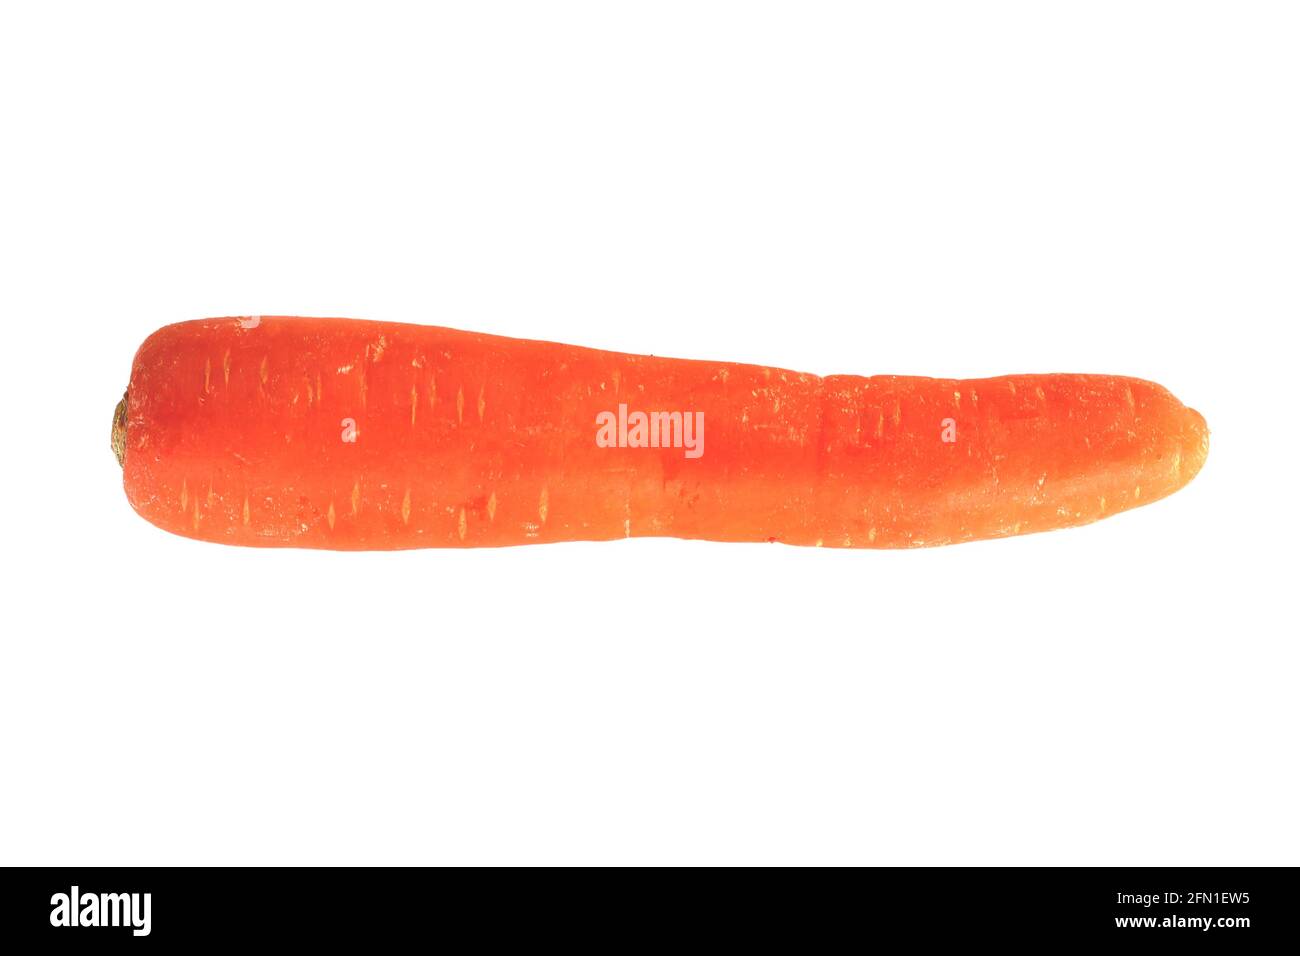 One Carrot isolate on a white background. Stock Photo